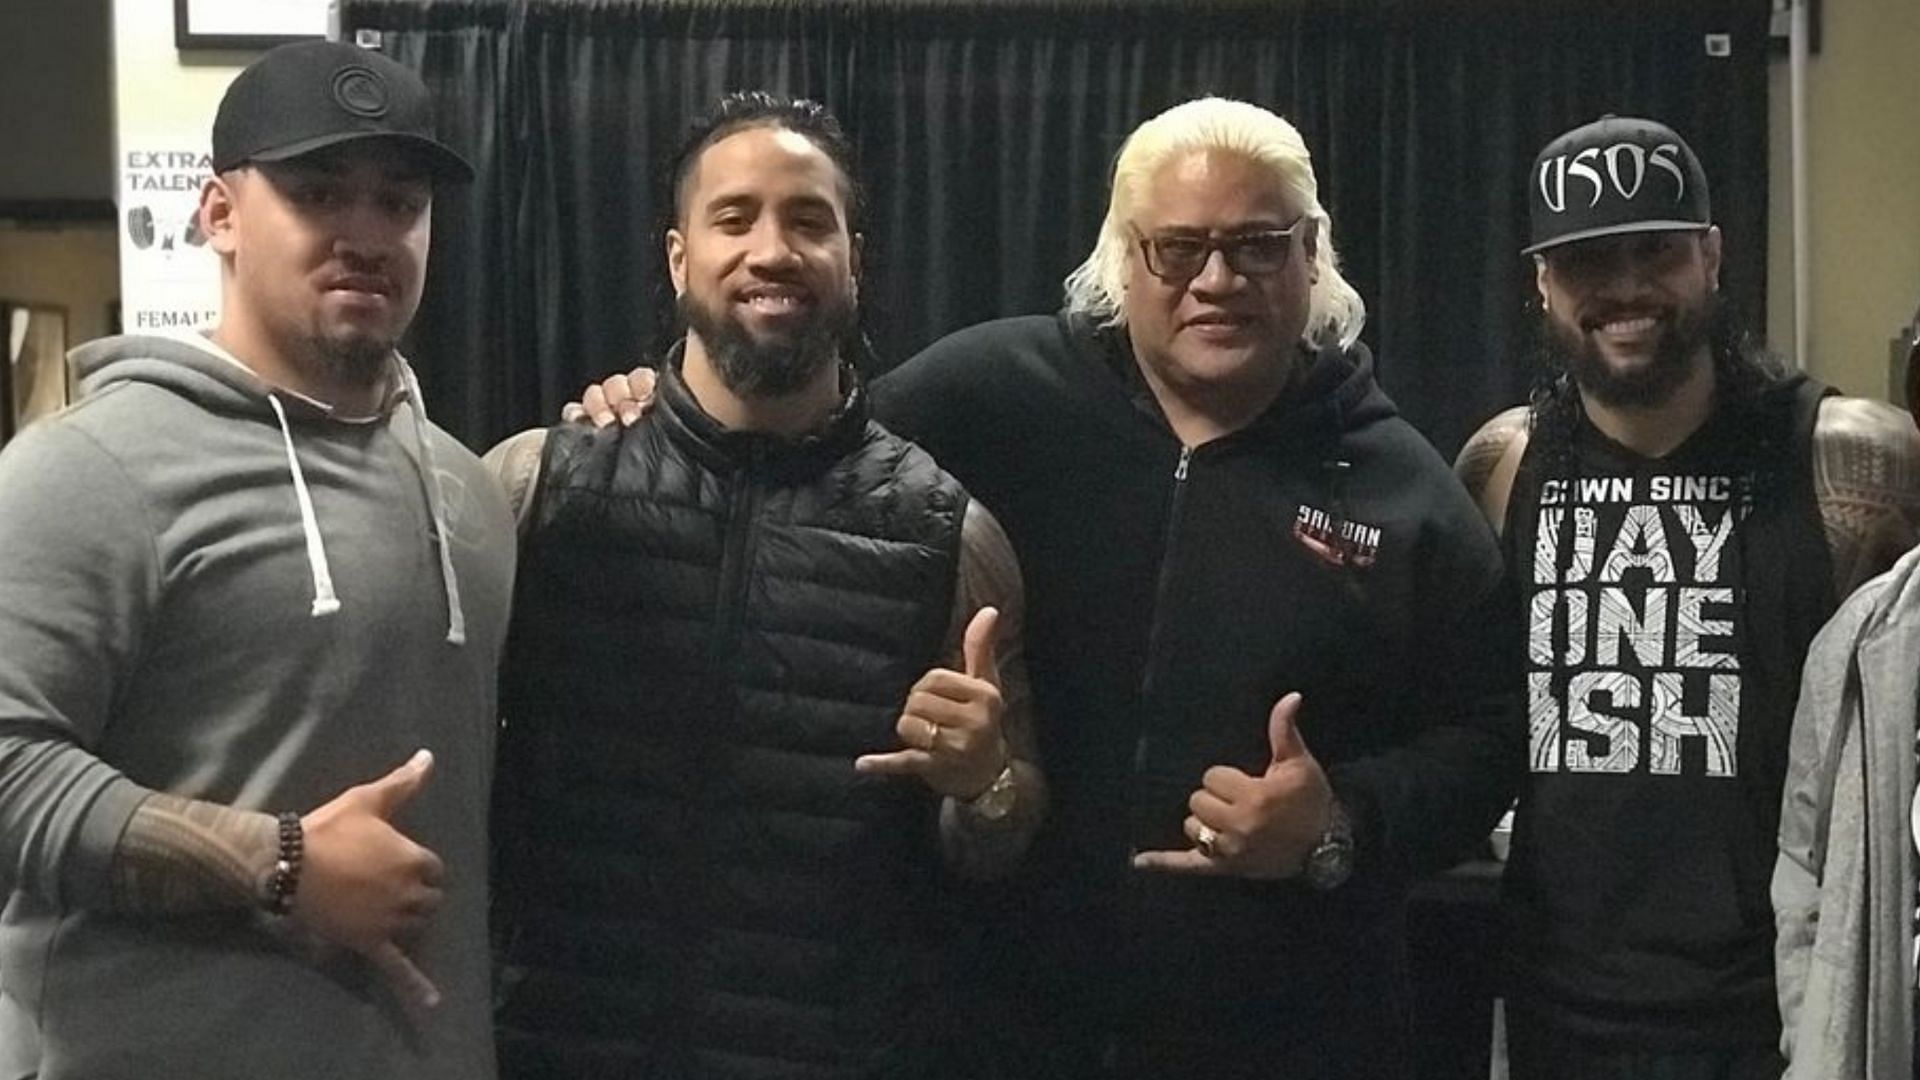 WWE Hall of Famer Rikishi with his sons, Jimmy Uso, Jey Uso, and Solo Sikoa